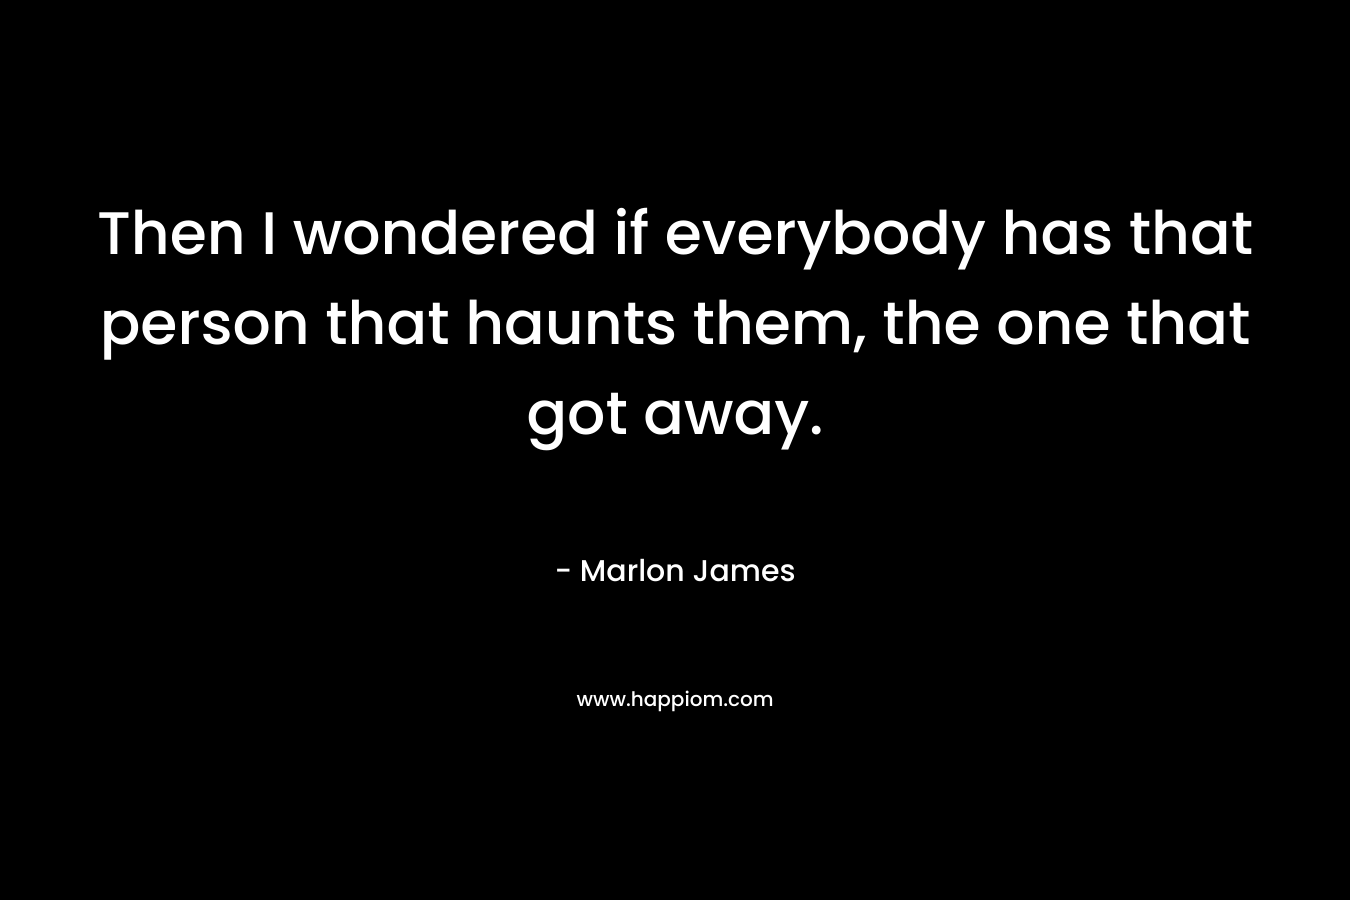 Then I wondered if everybody has that person that haunts them, the one that got away.